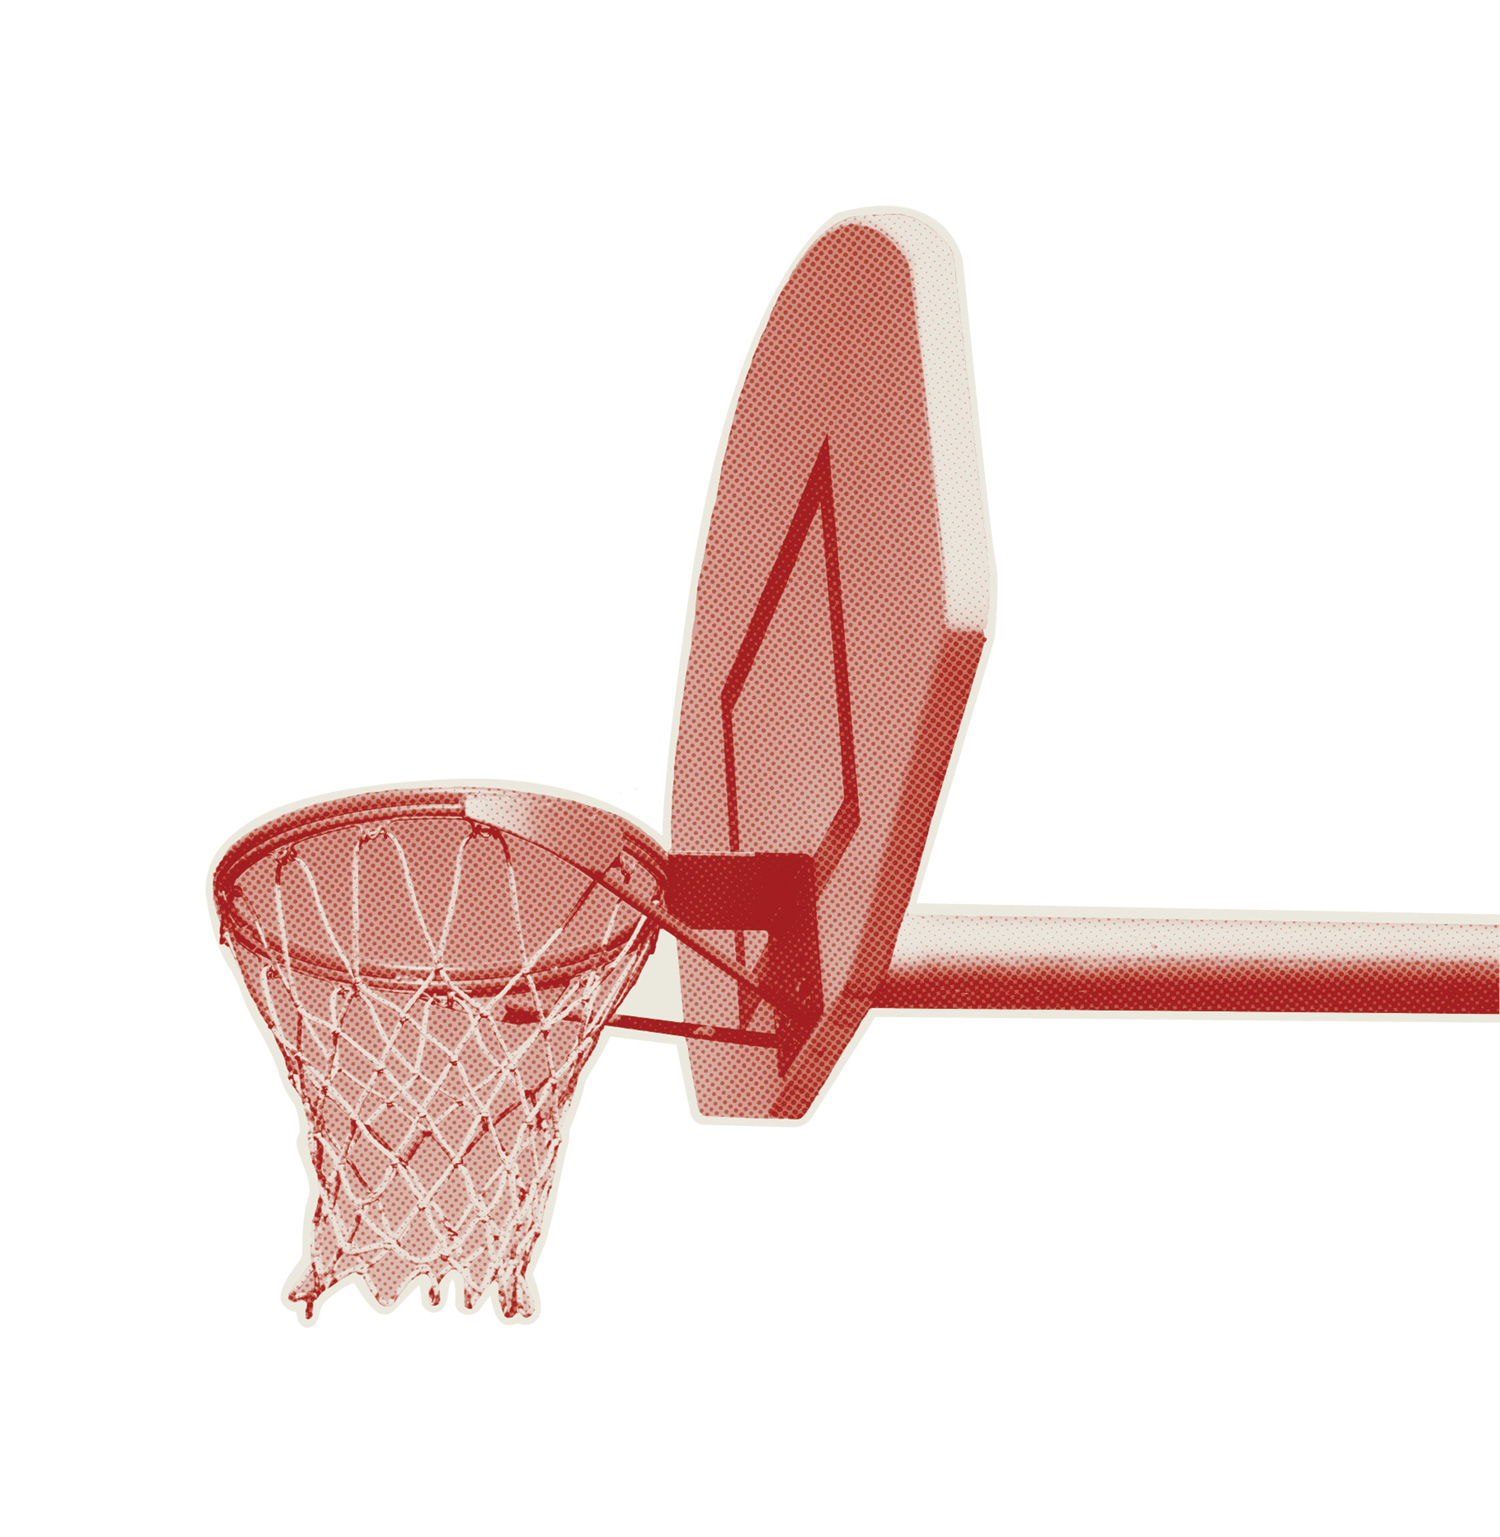 Cut out of the top of a basketball hoop digitally overlayed in a light red coloring. 